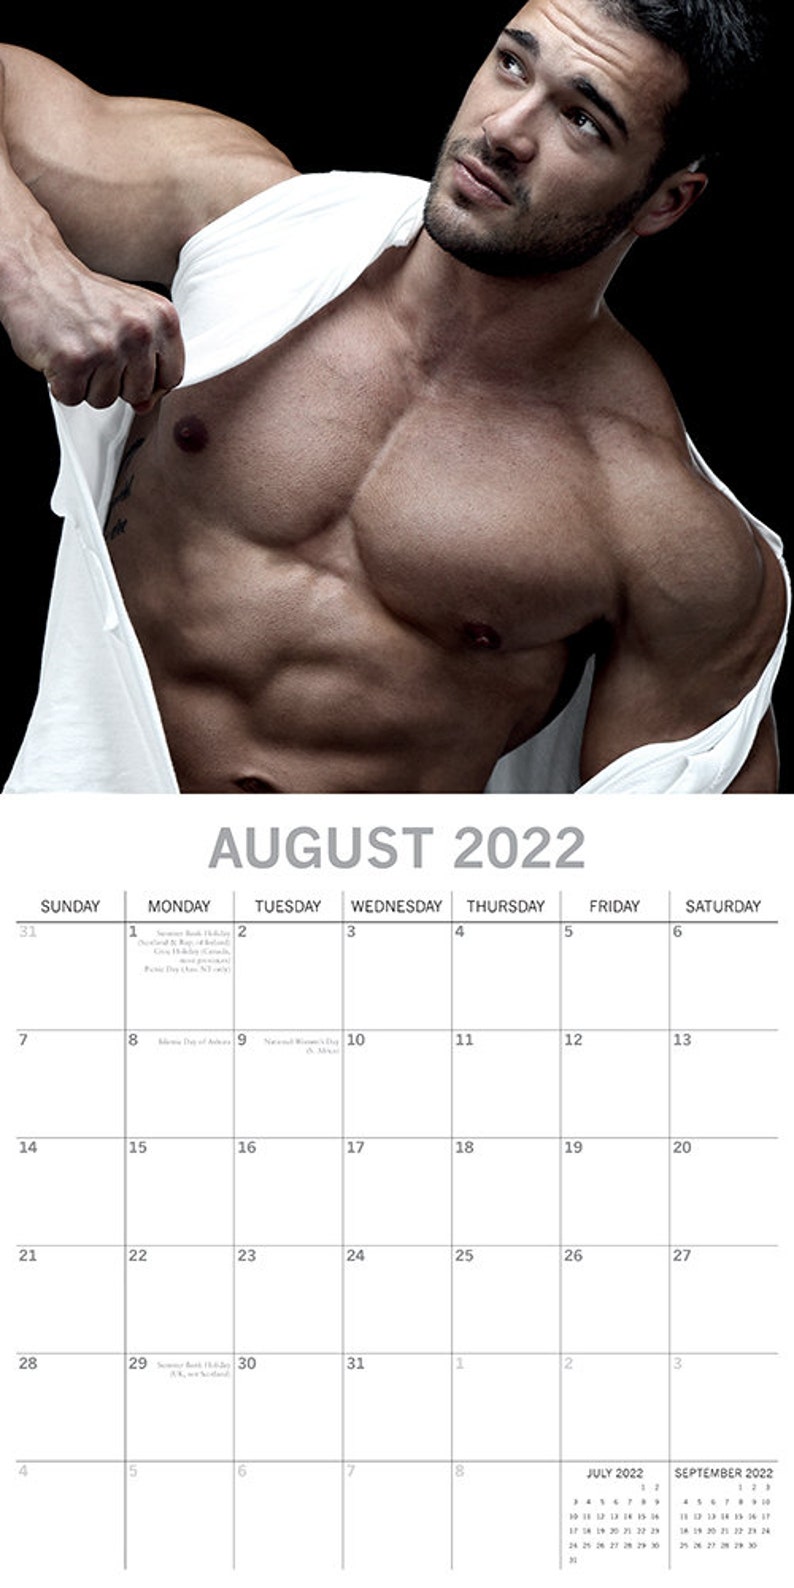 shirtless-cowboys-2022-wall-calendar-muscle-hunks-hot-guys-images-and-photos-finder